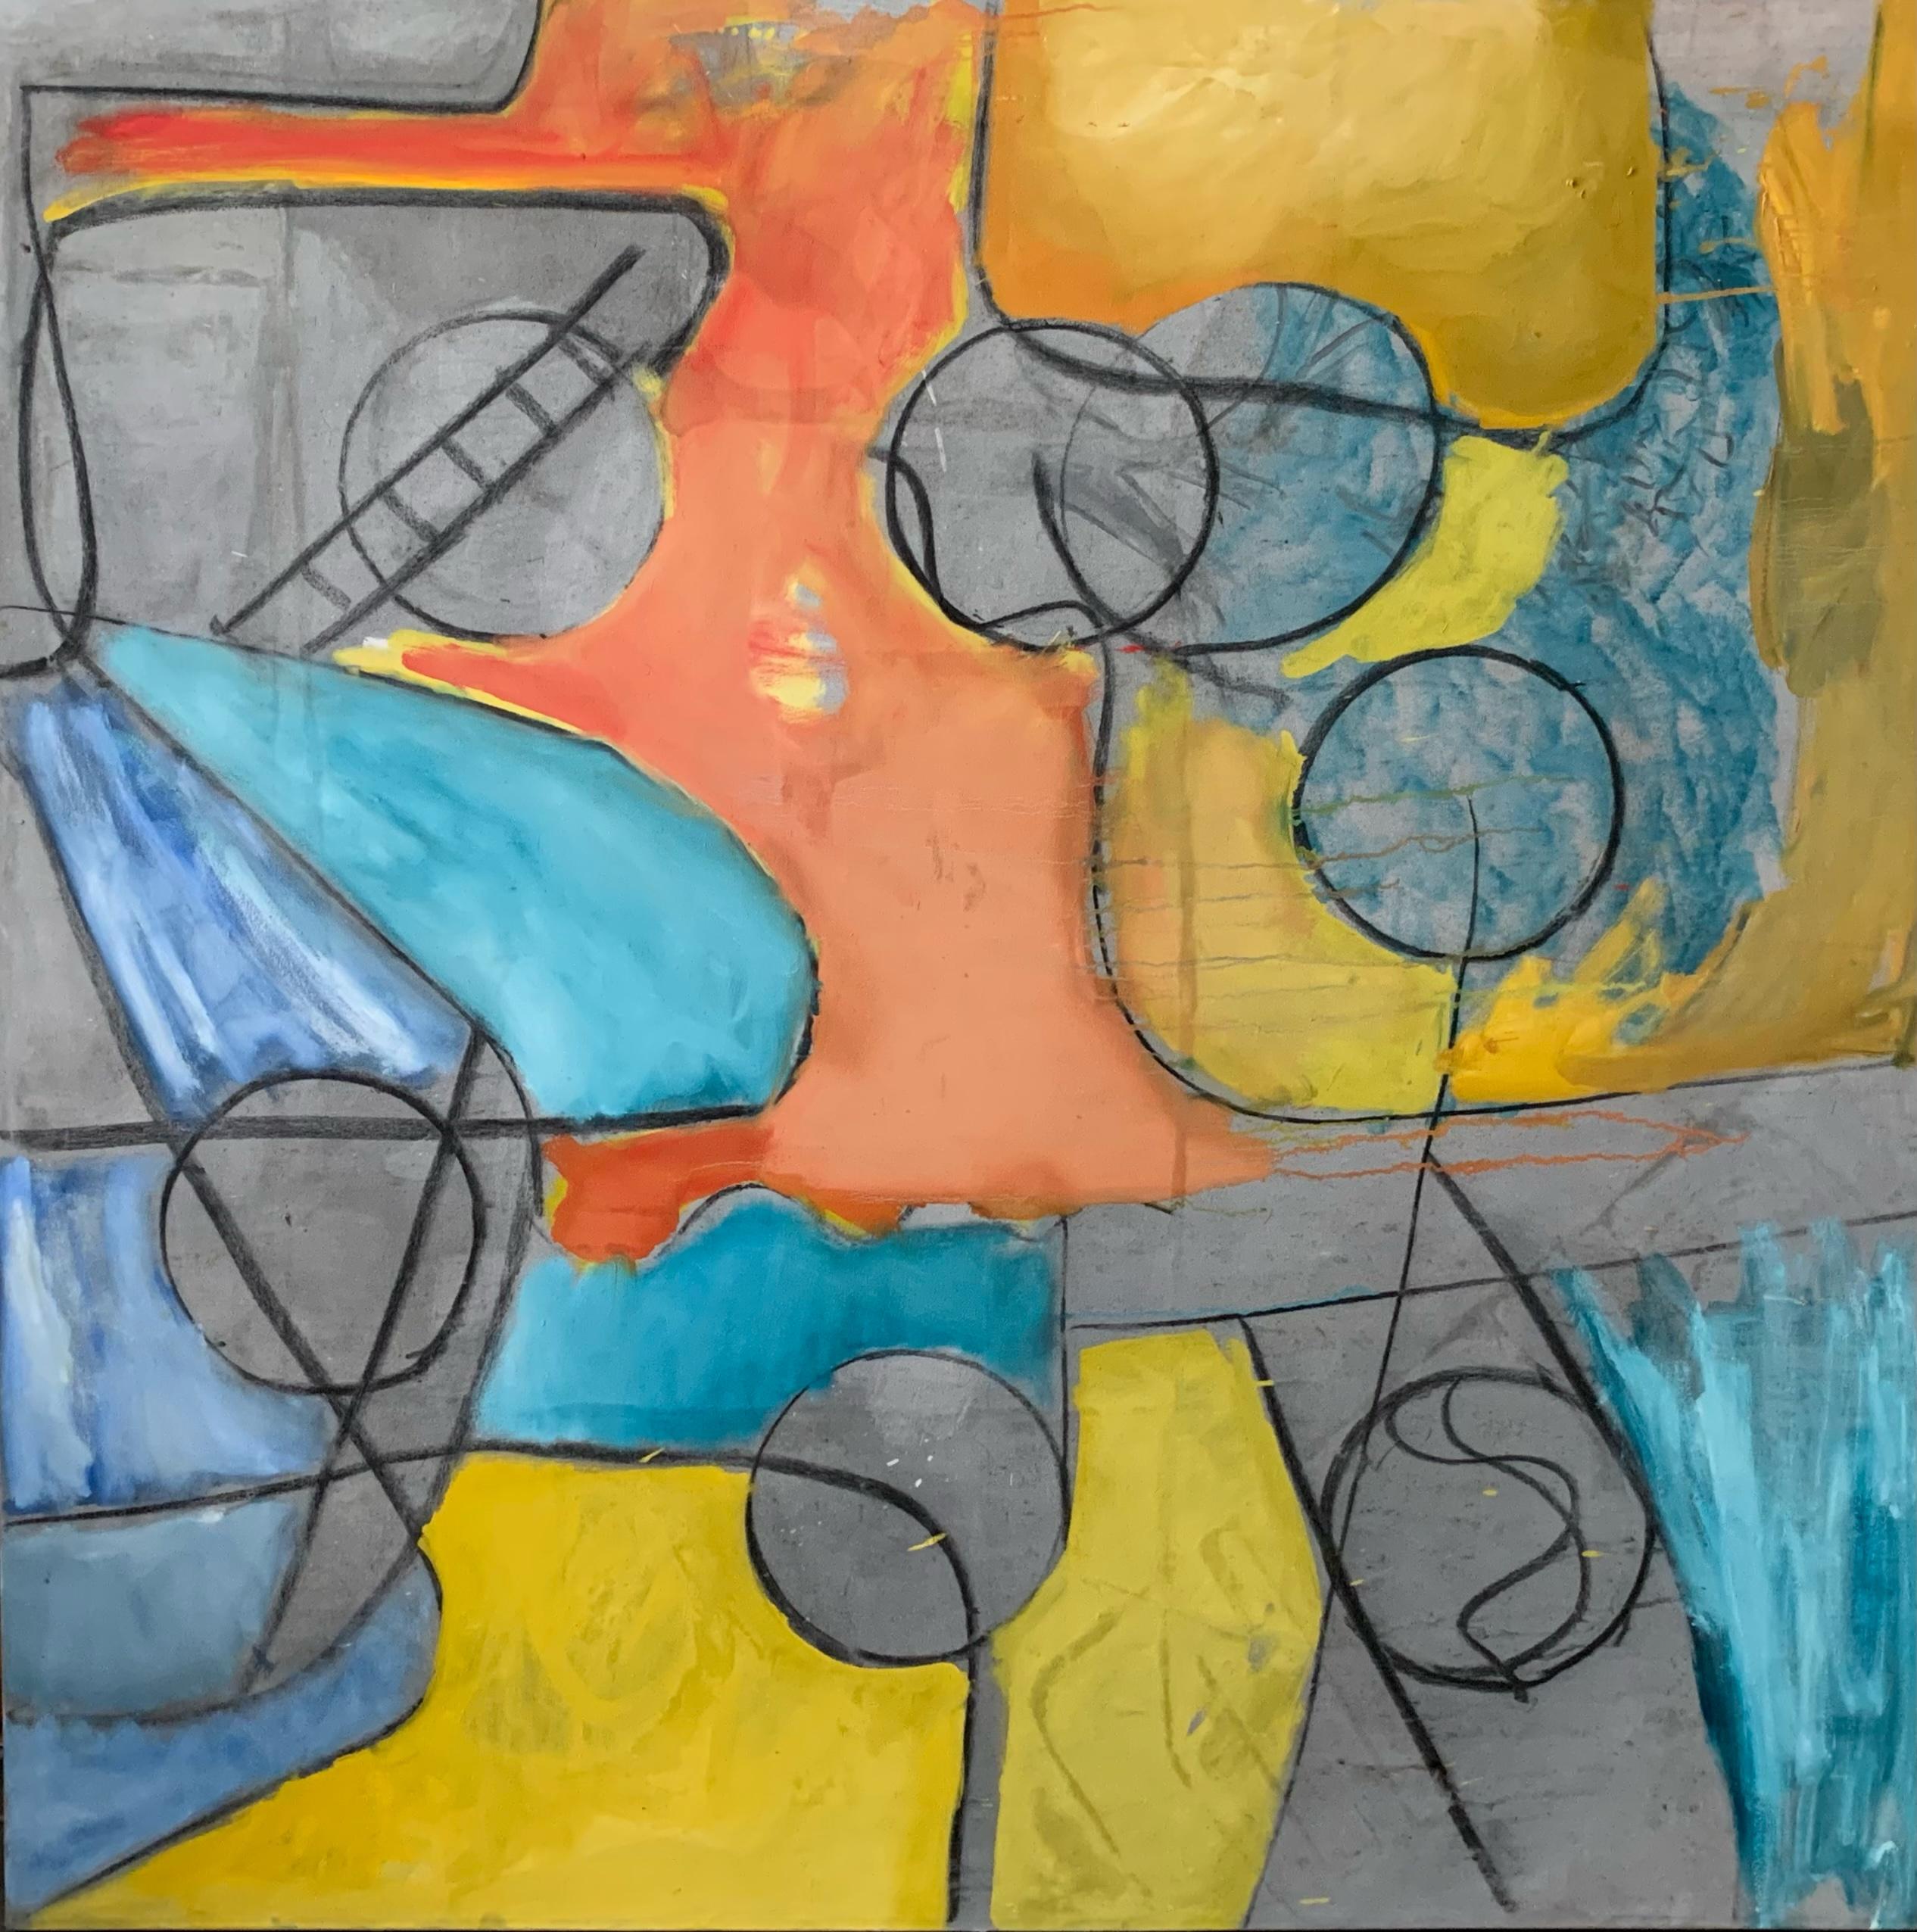 Steven H. Rehfeld Abstract Painting - "Circles"Blue, Orange, and Yellow Contemporary Abstract By Steven Rehfeld